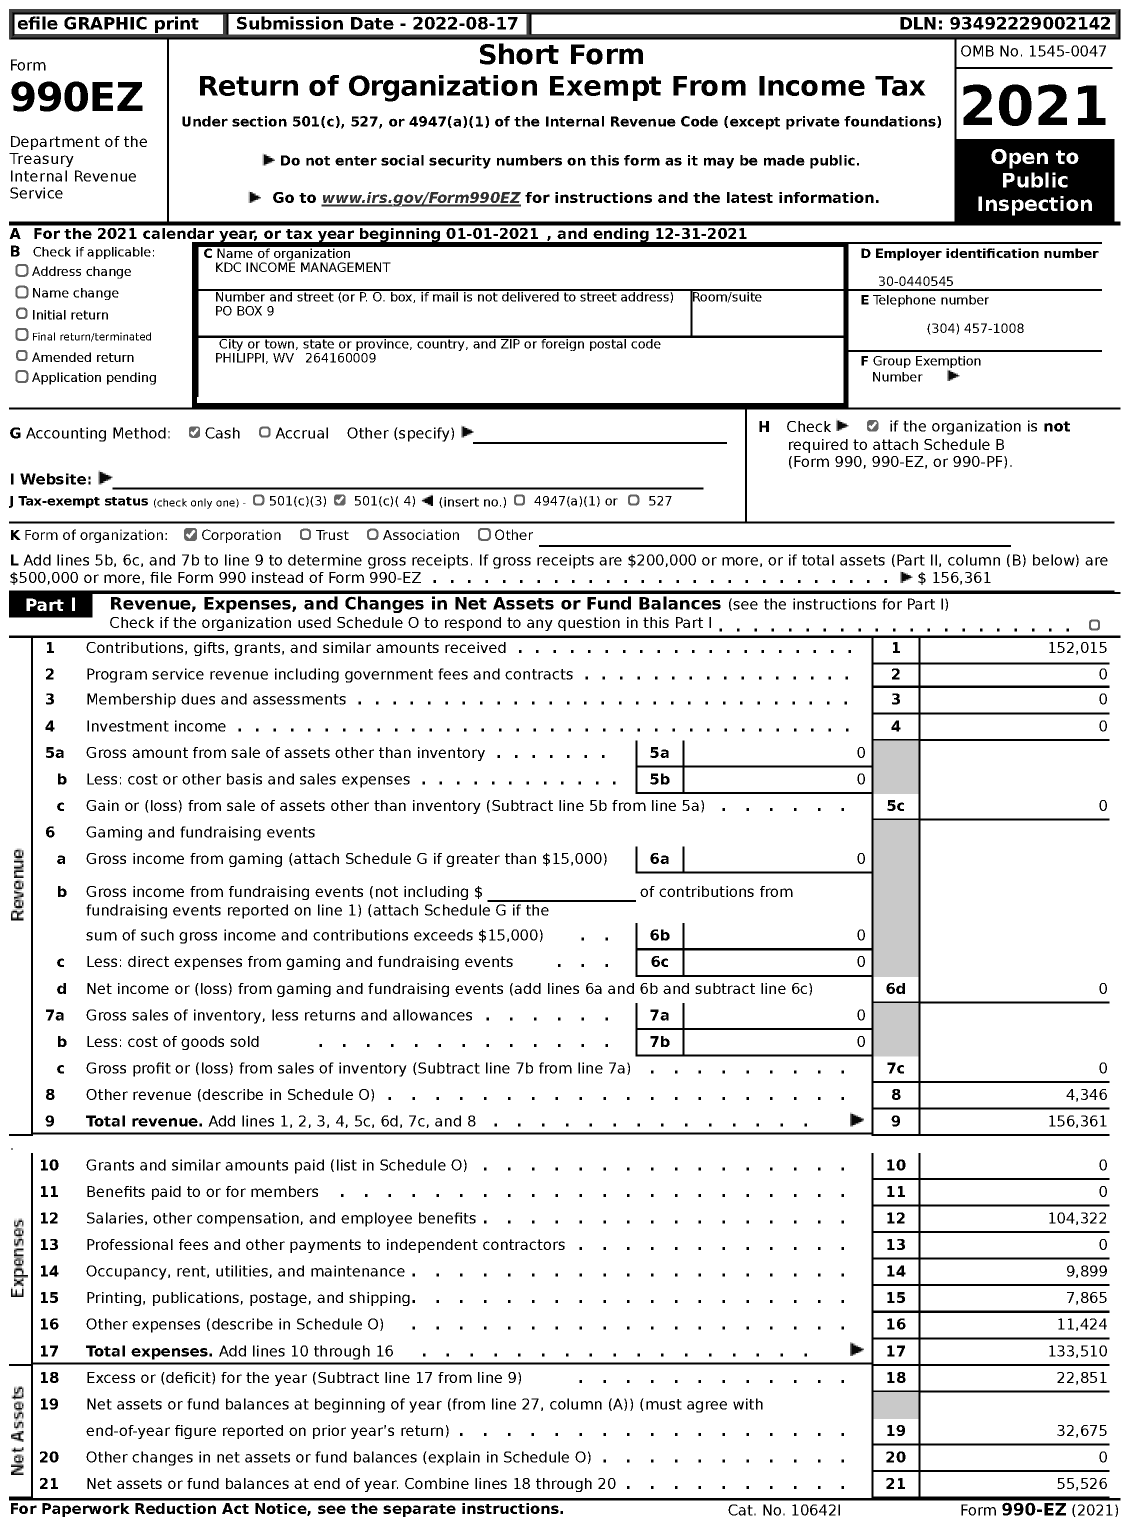 Image of first page of 2021 Form 990EZ for KDC Income Management